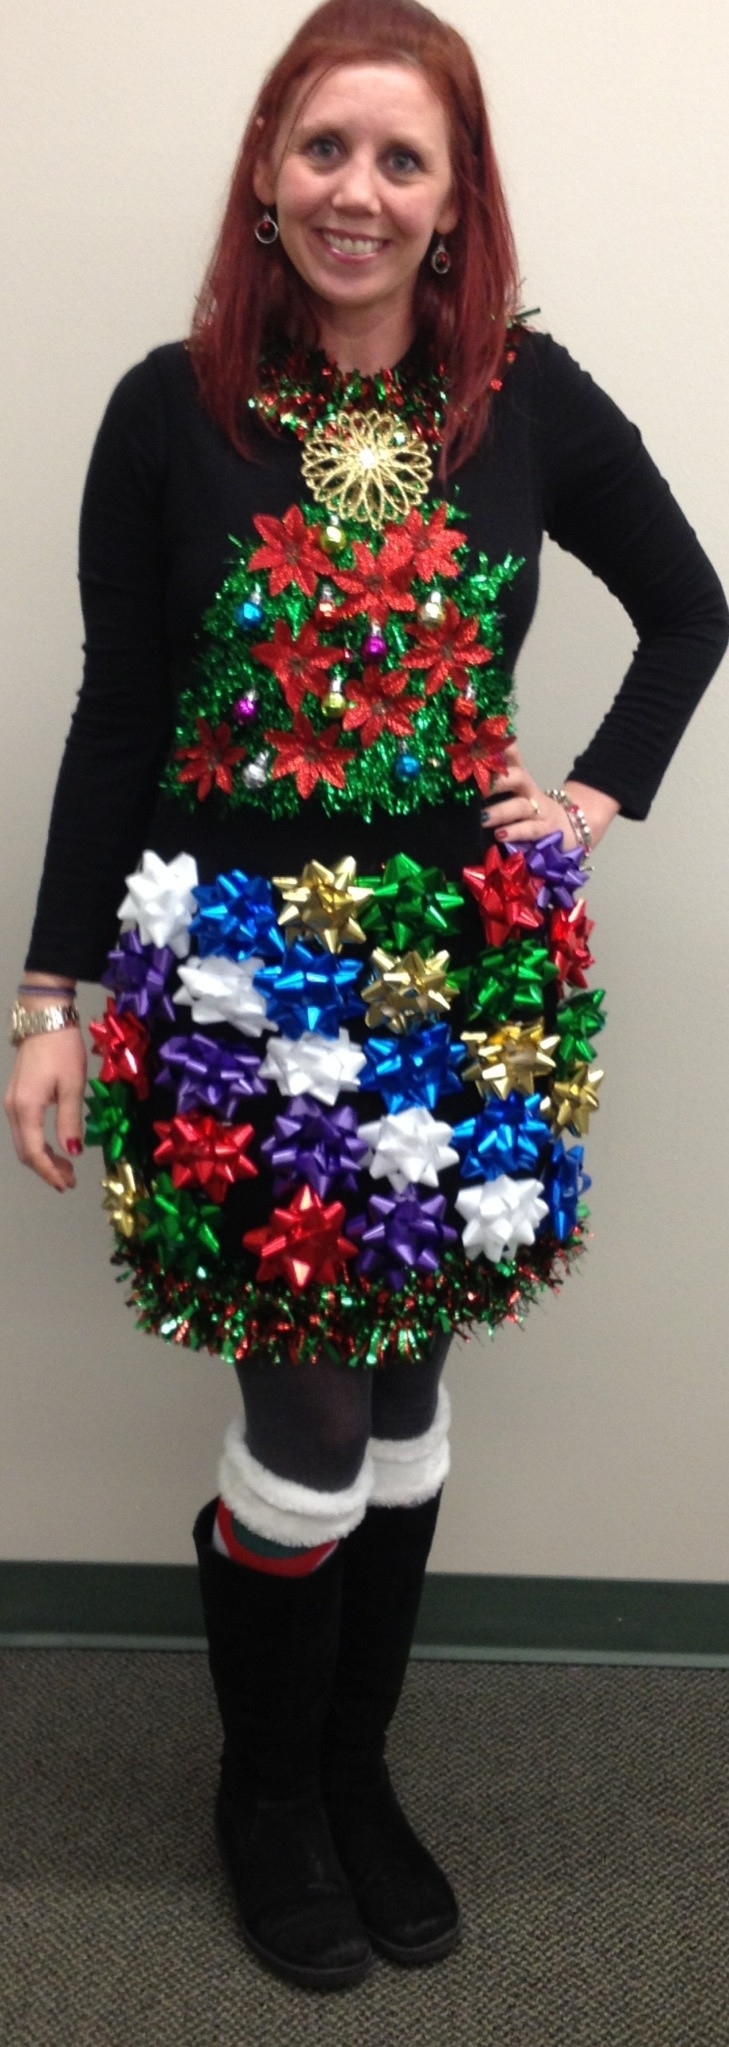 Tacky Christmas Outfit Ideas
 The 25 best Tacky christmas outfit ideas on Pinterest